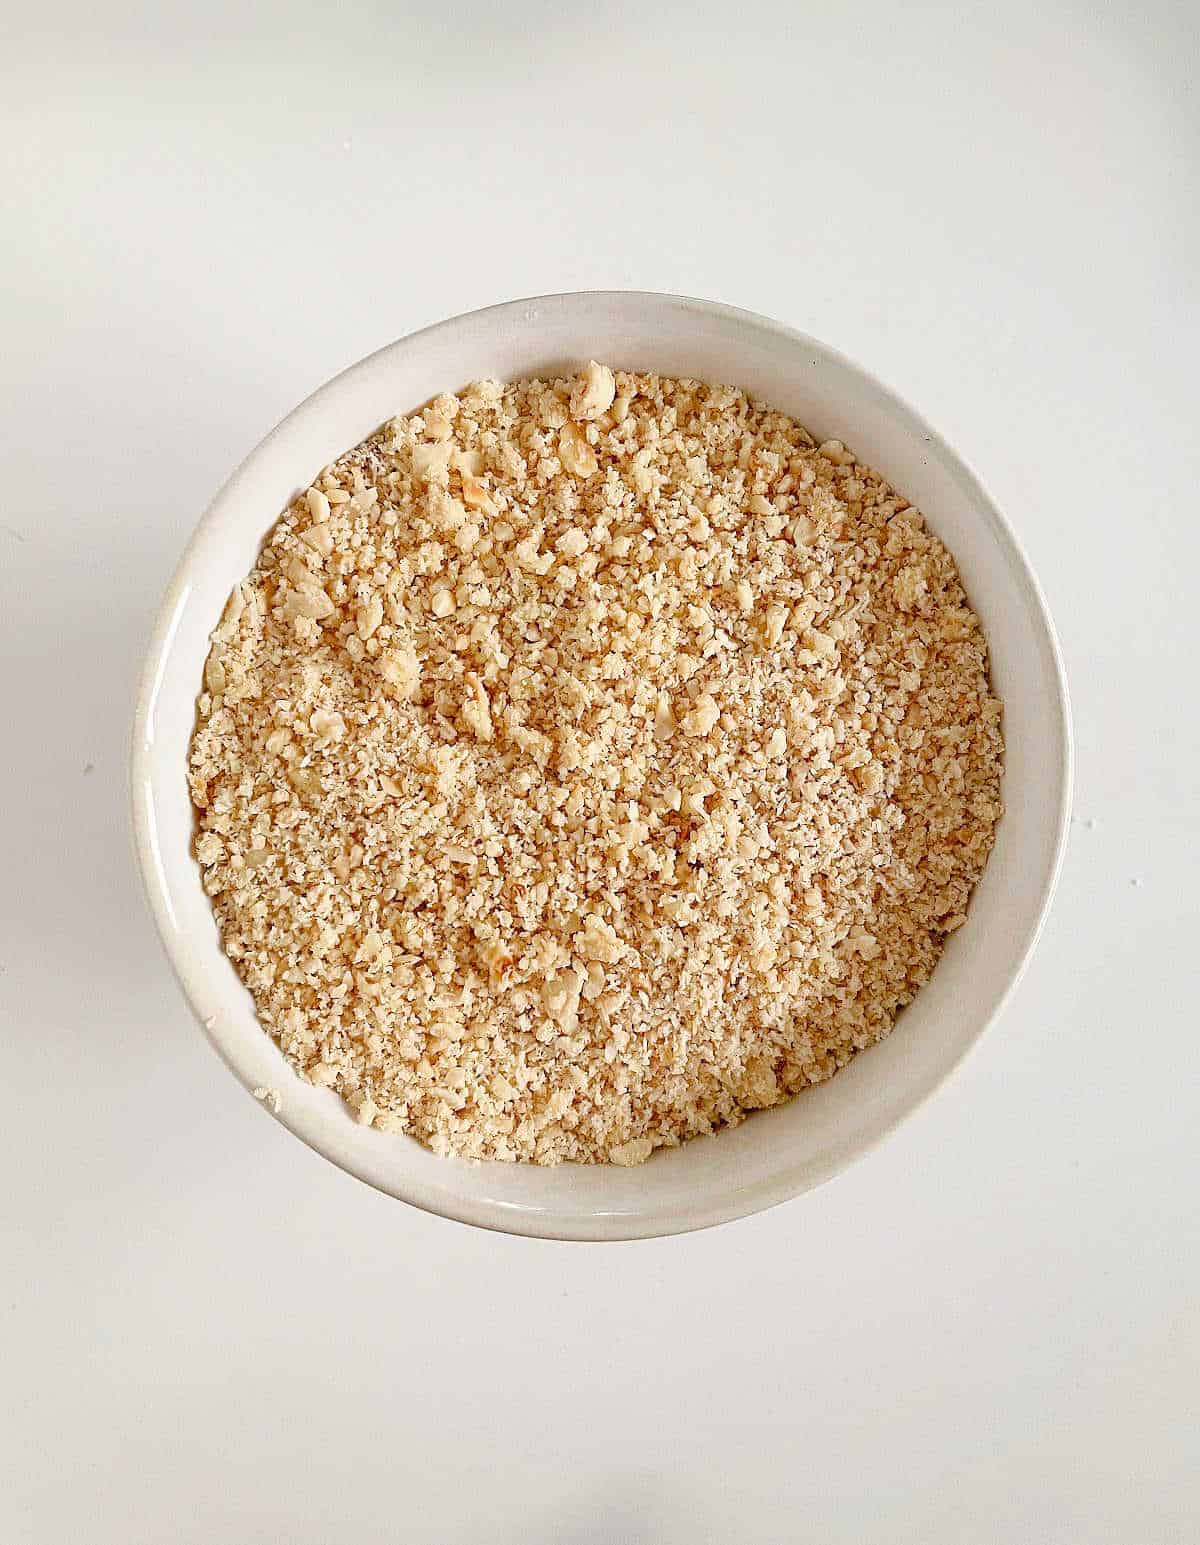 White bowl with ground hazelnuts on a white surface. Top view.